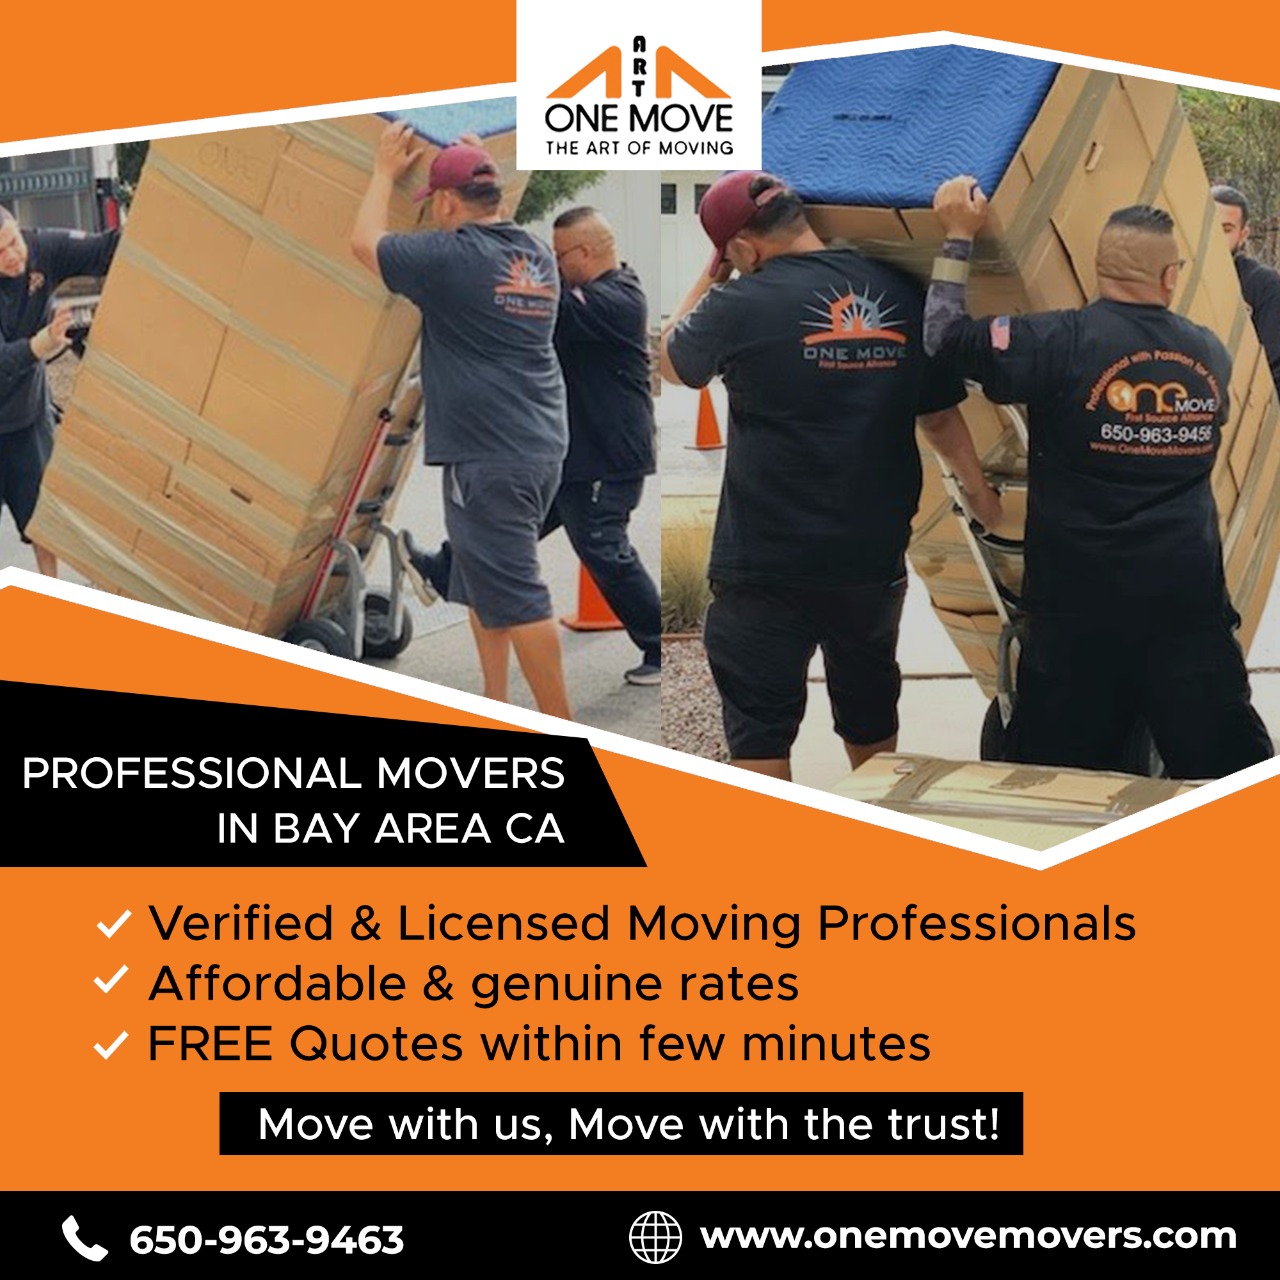 The One Move Moving Delivery & Storage